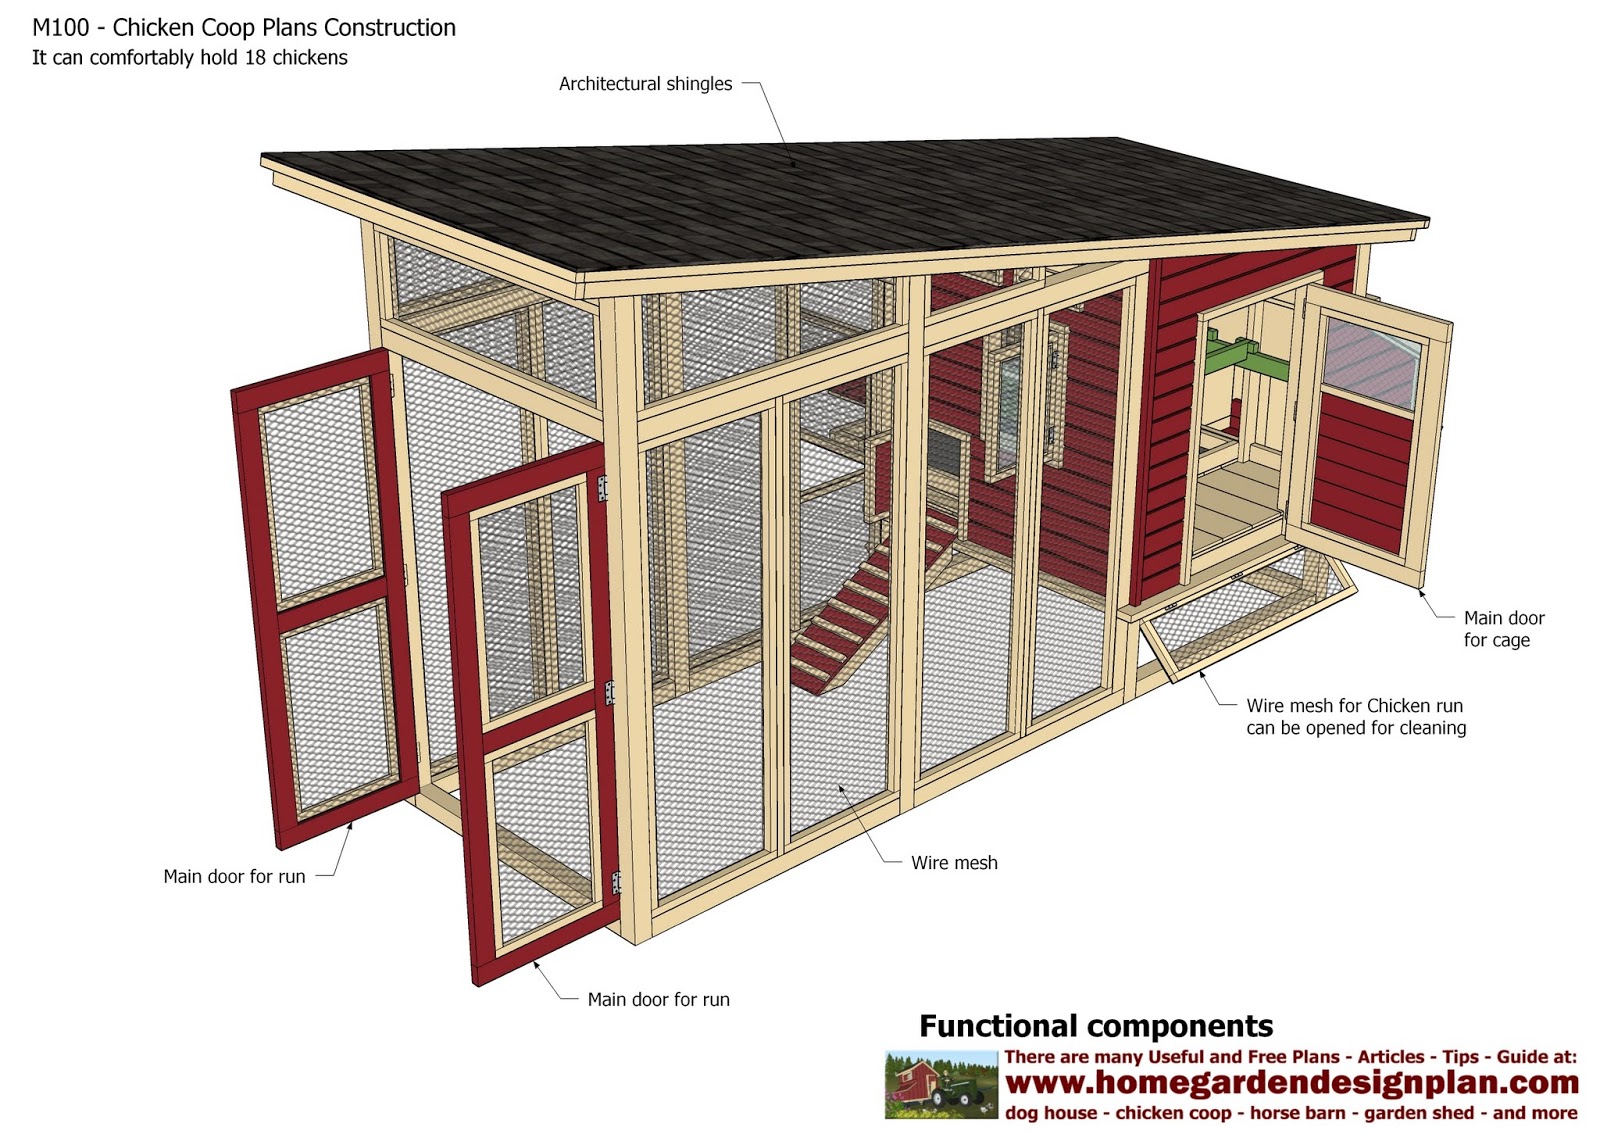 Tanto Nyam: Tell a Chicken coop plans pdf download free